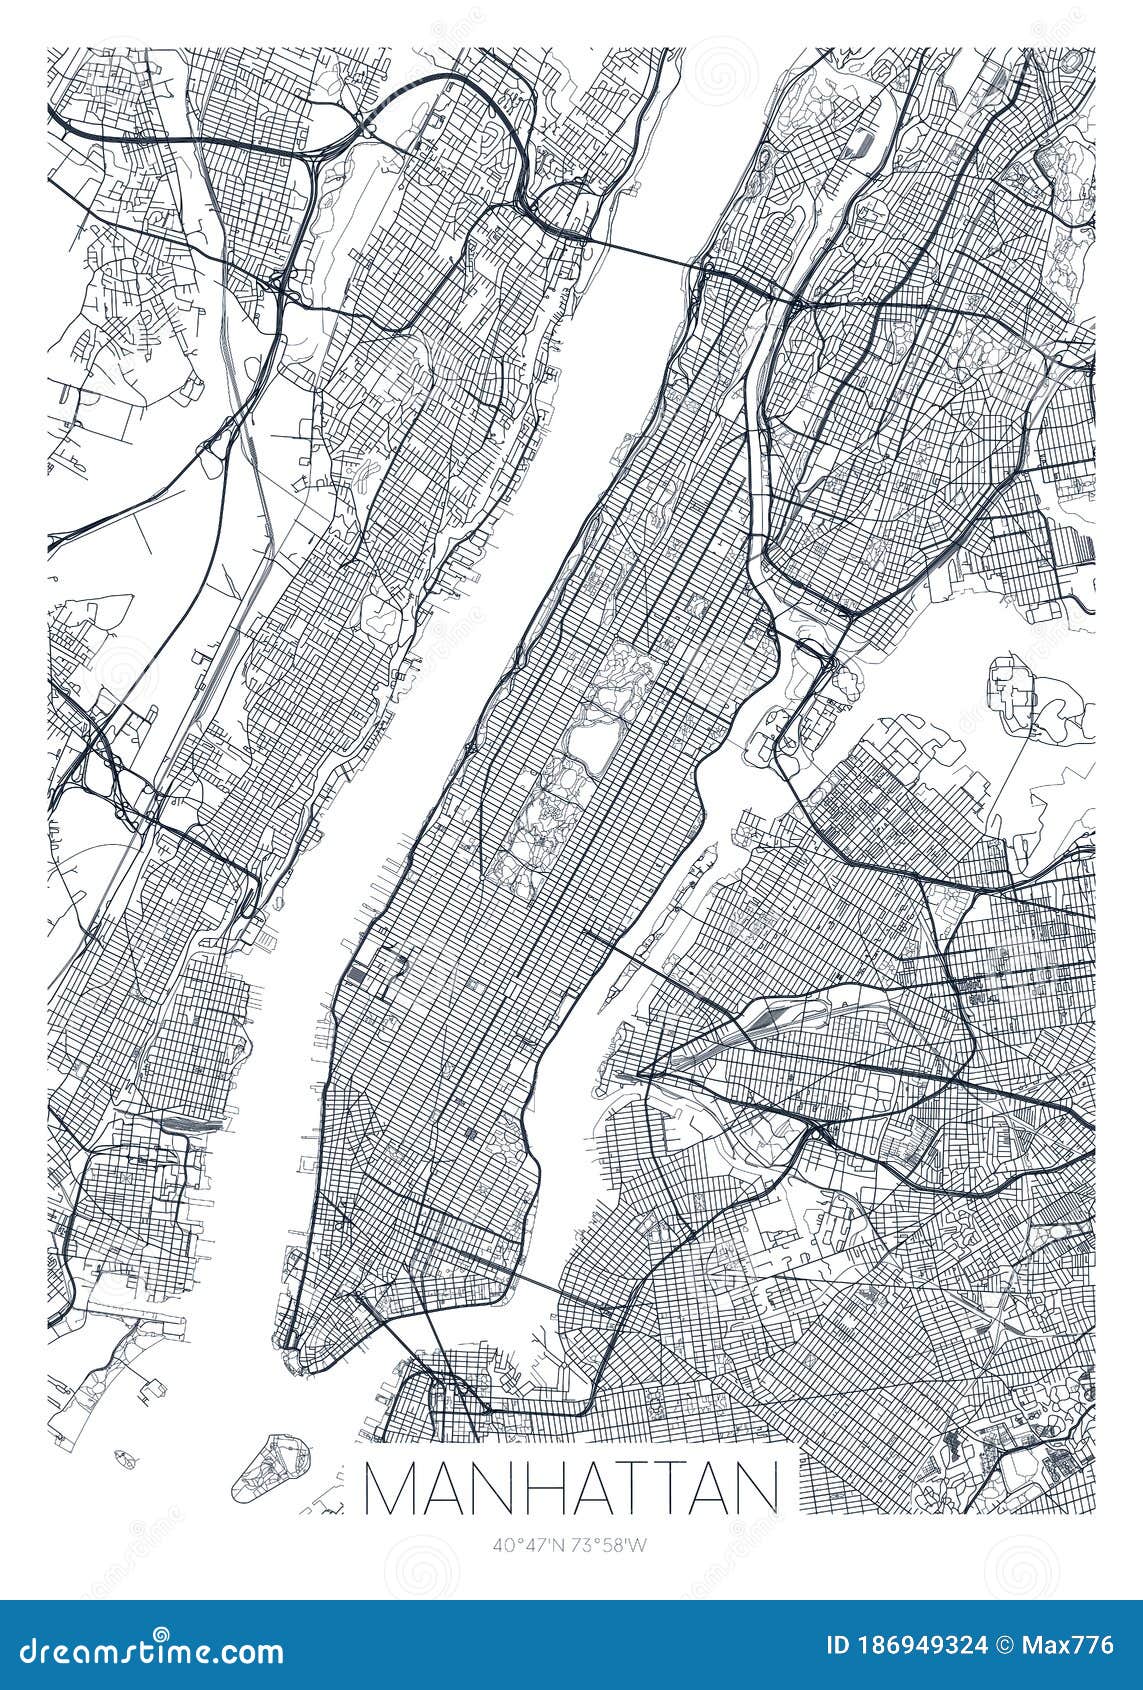 detailed borough map of manhattan new york city,  poster or postcard for city road and park plan